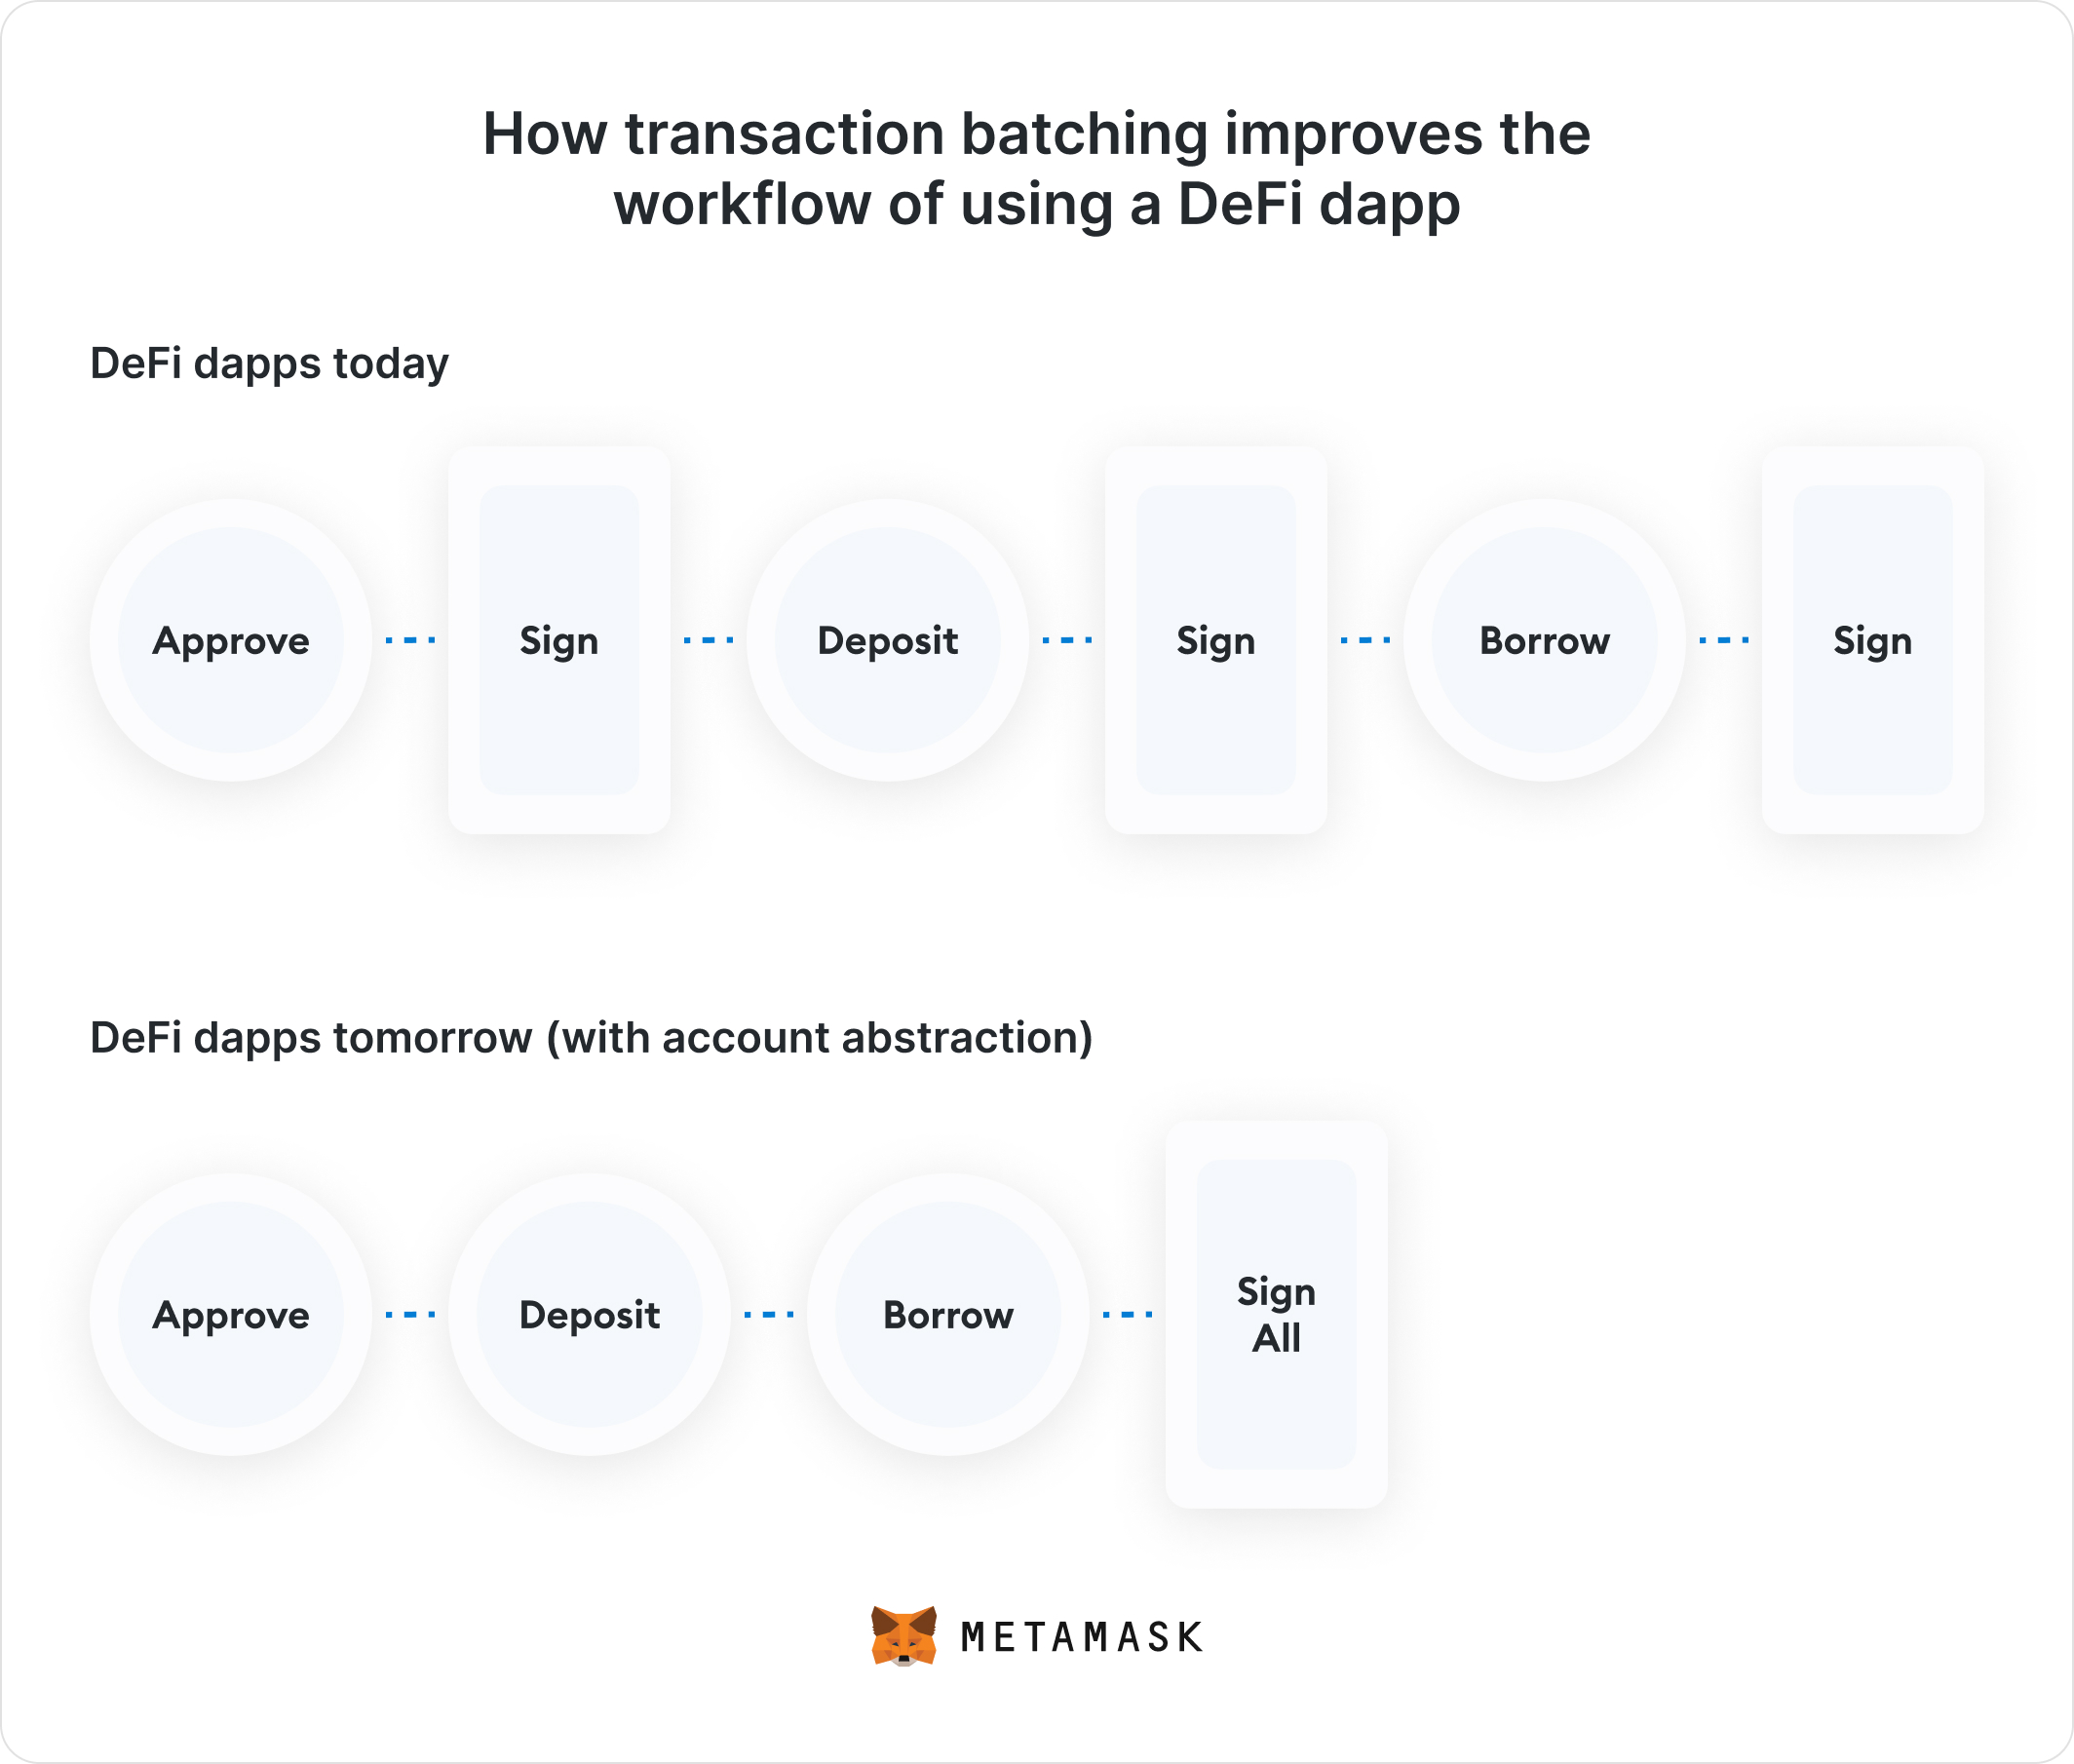 How transaction batching improves the workflow of using a DeFi dapp@2x